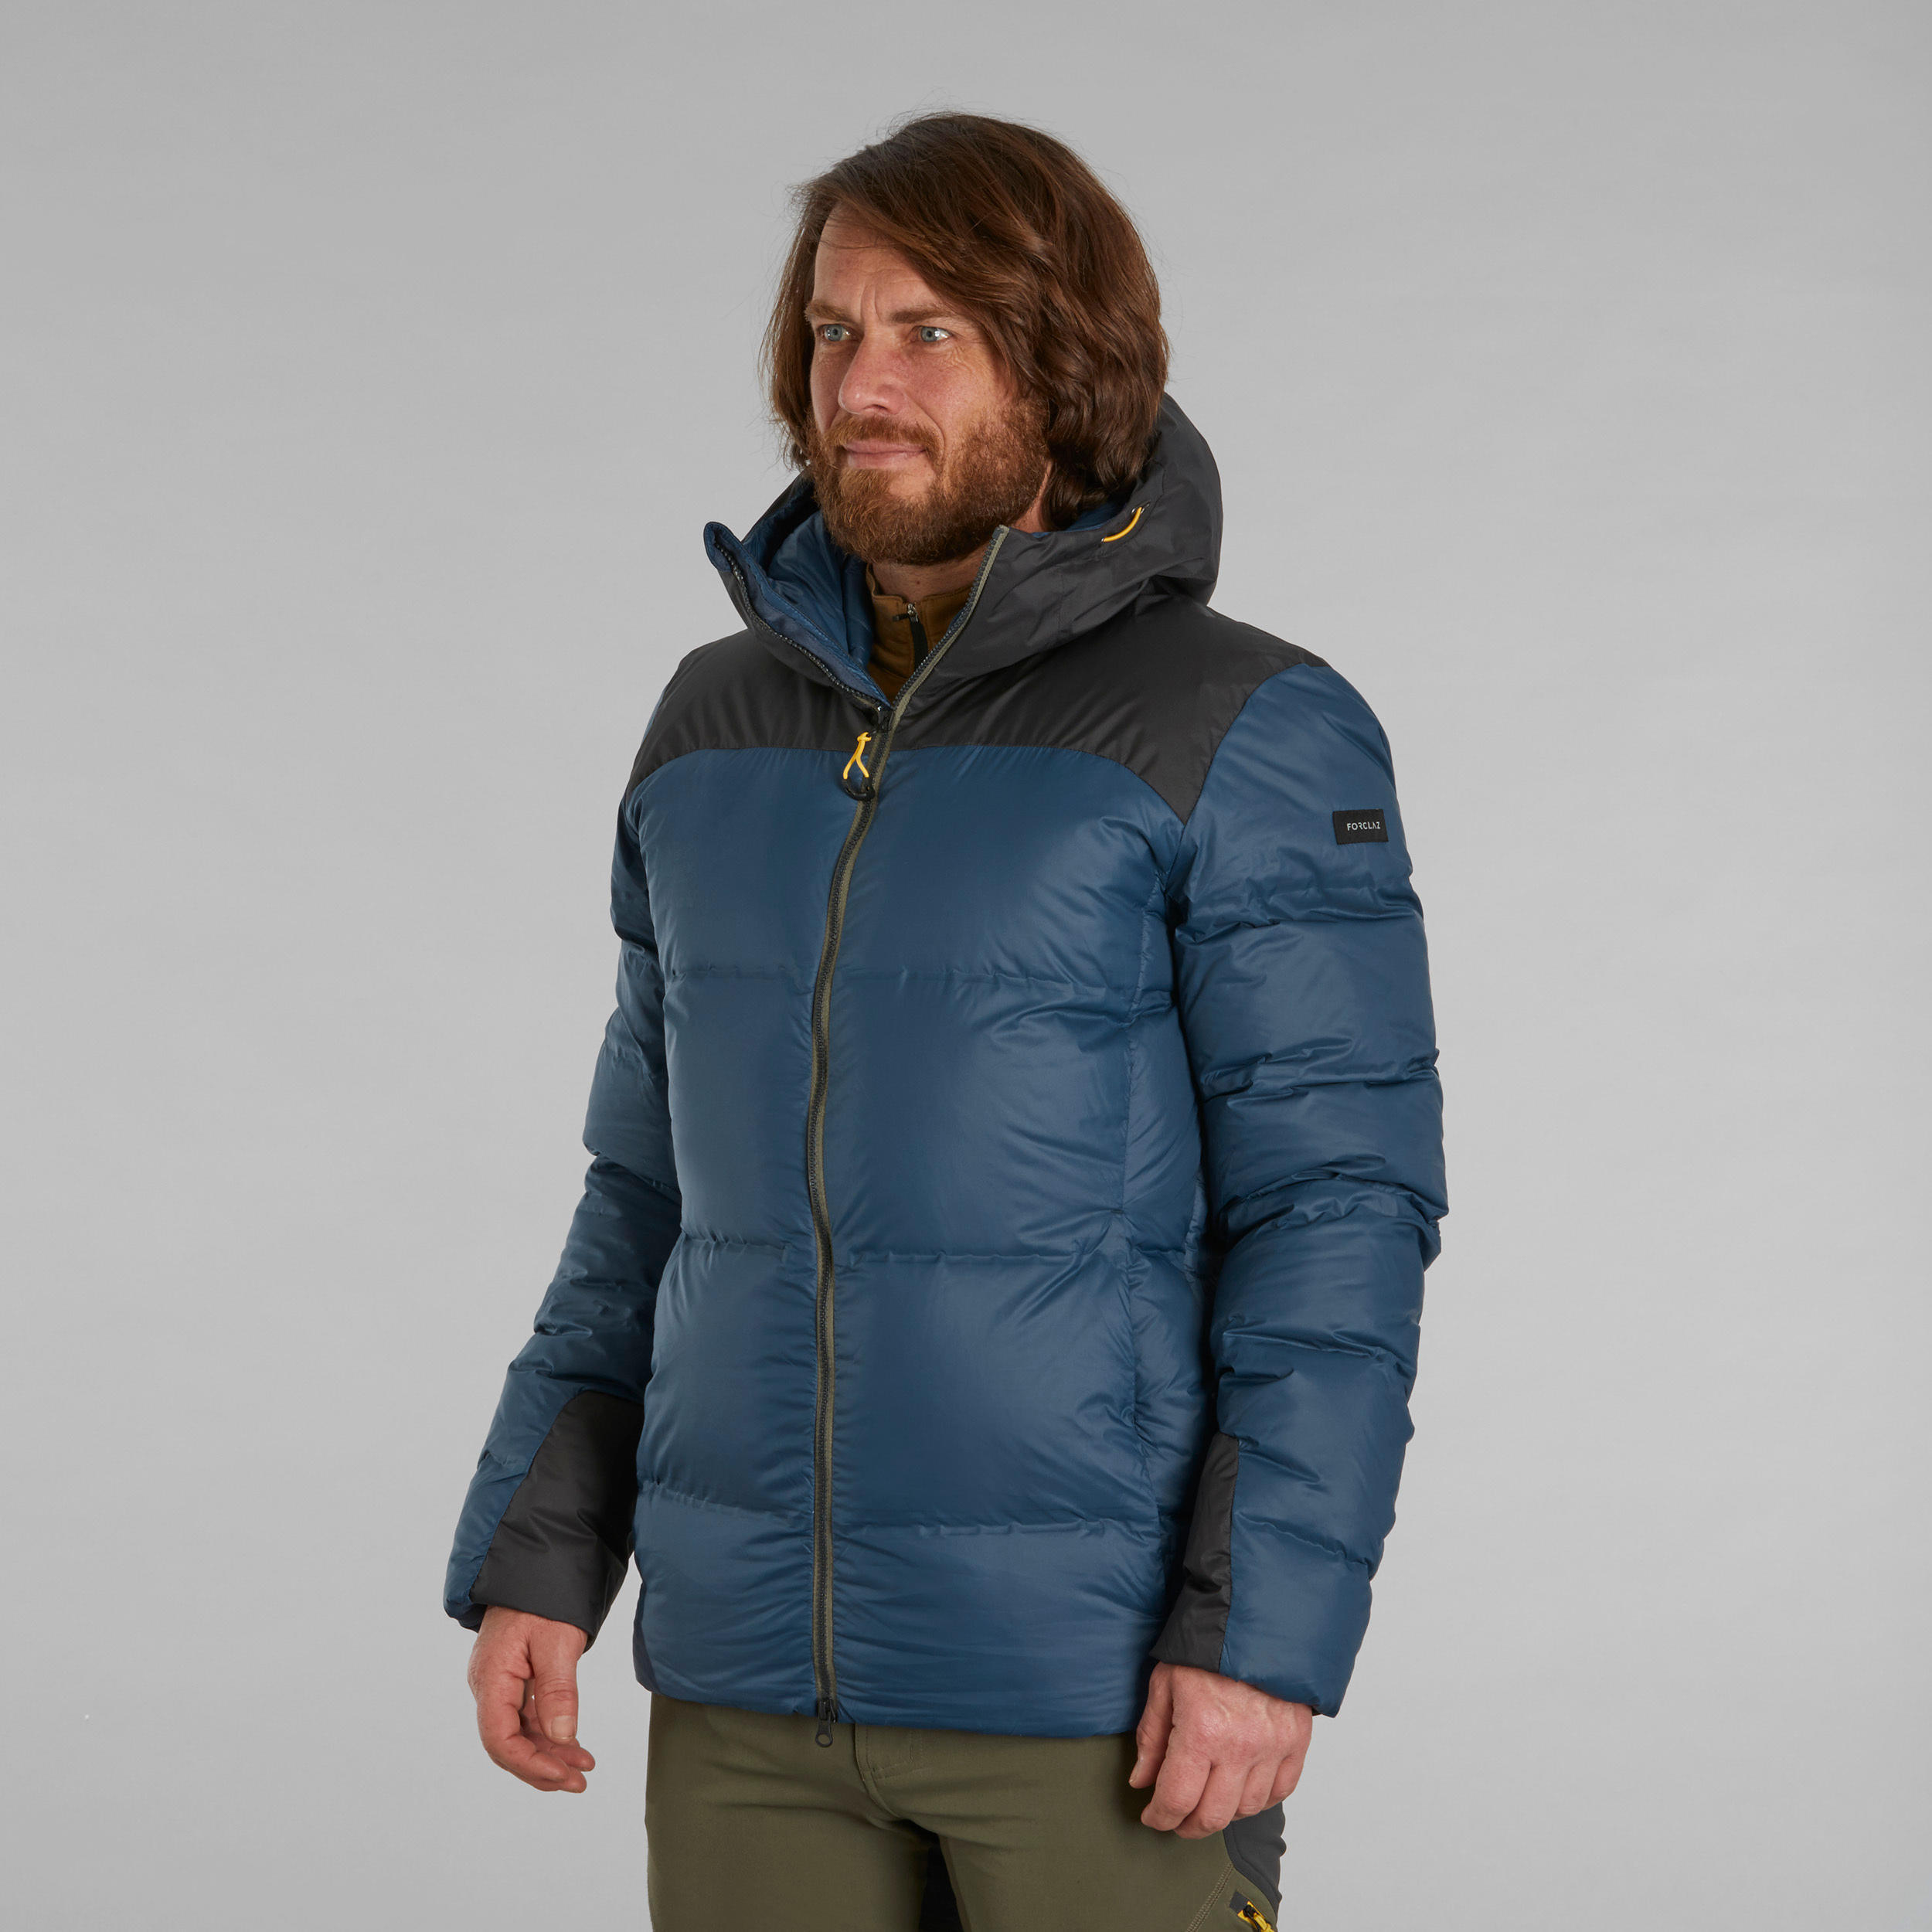 Men’s mountain and trekking padded and hooded jacket - MT900 -18°C 1/10